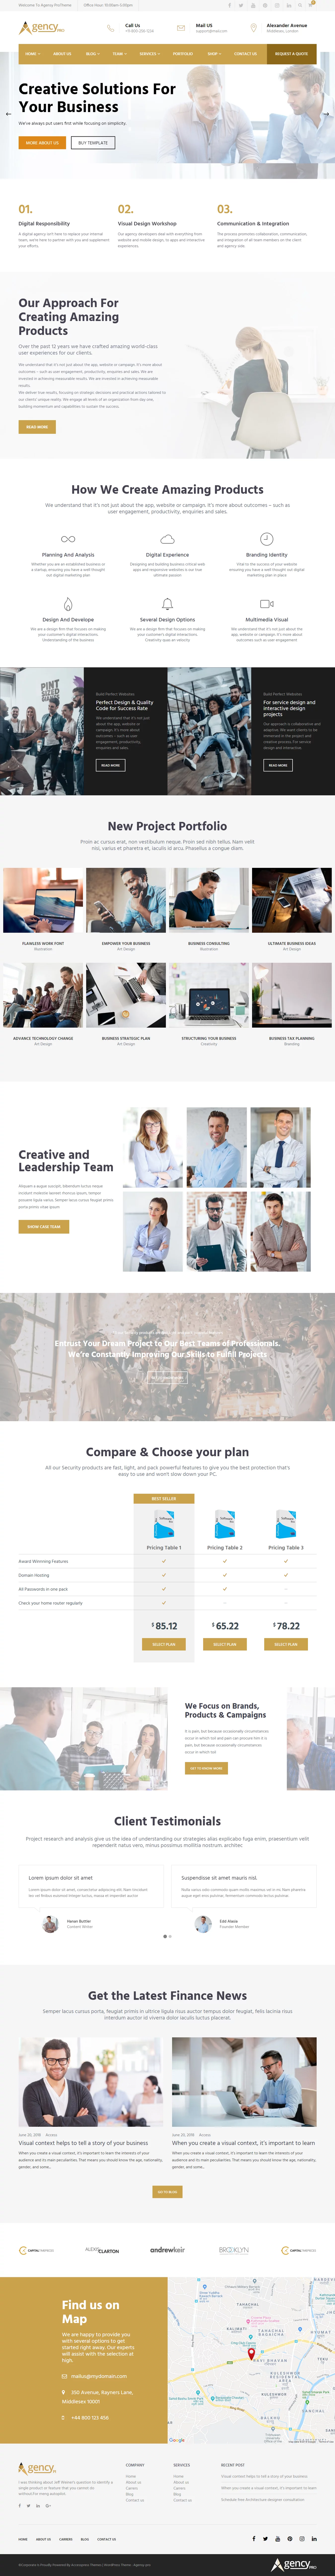 Agency Pro - Best Coming Soon and Under Construction Premium WordPress Themes and Templates 